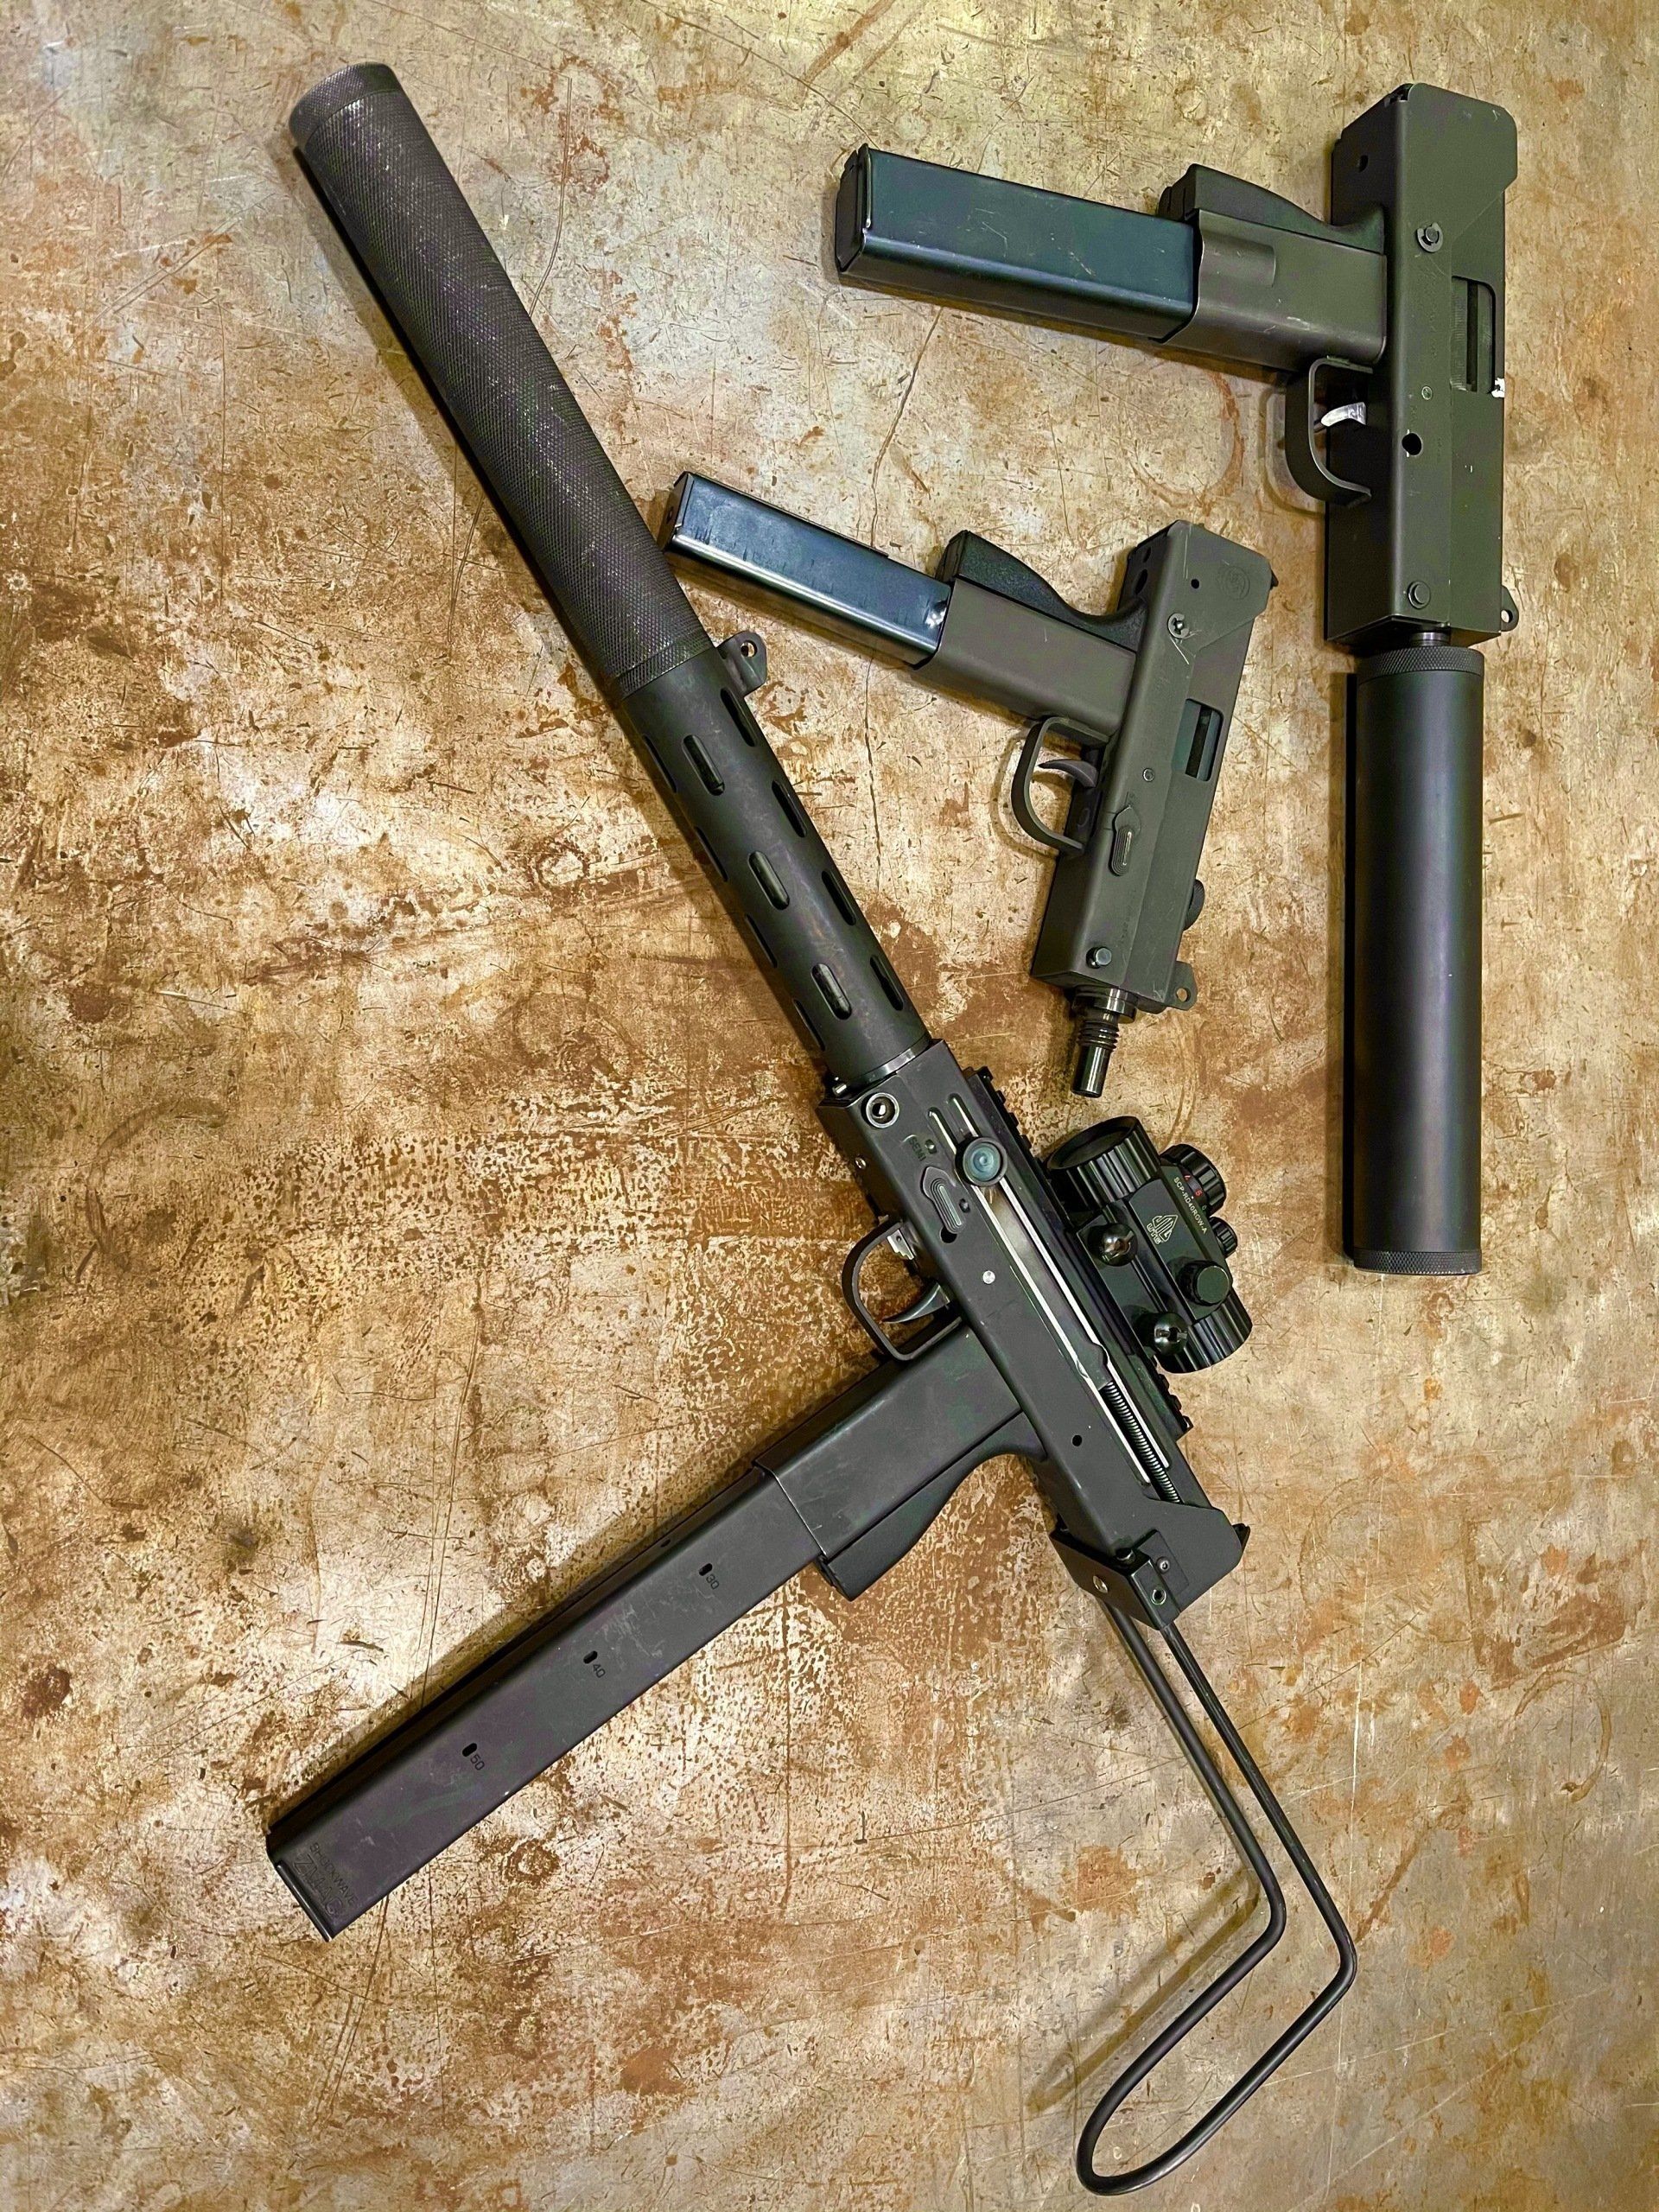 Completed Phoenix MAC-10 & Variant Builds